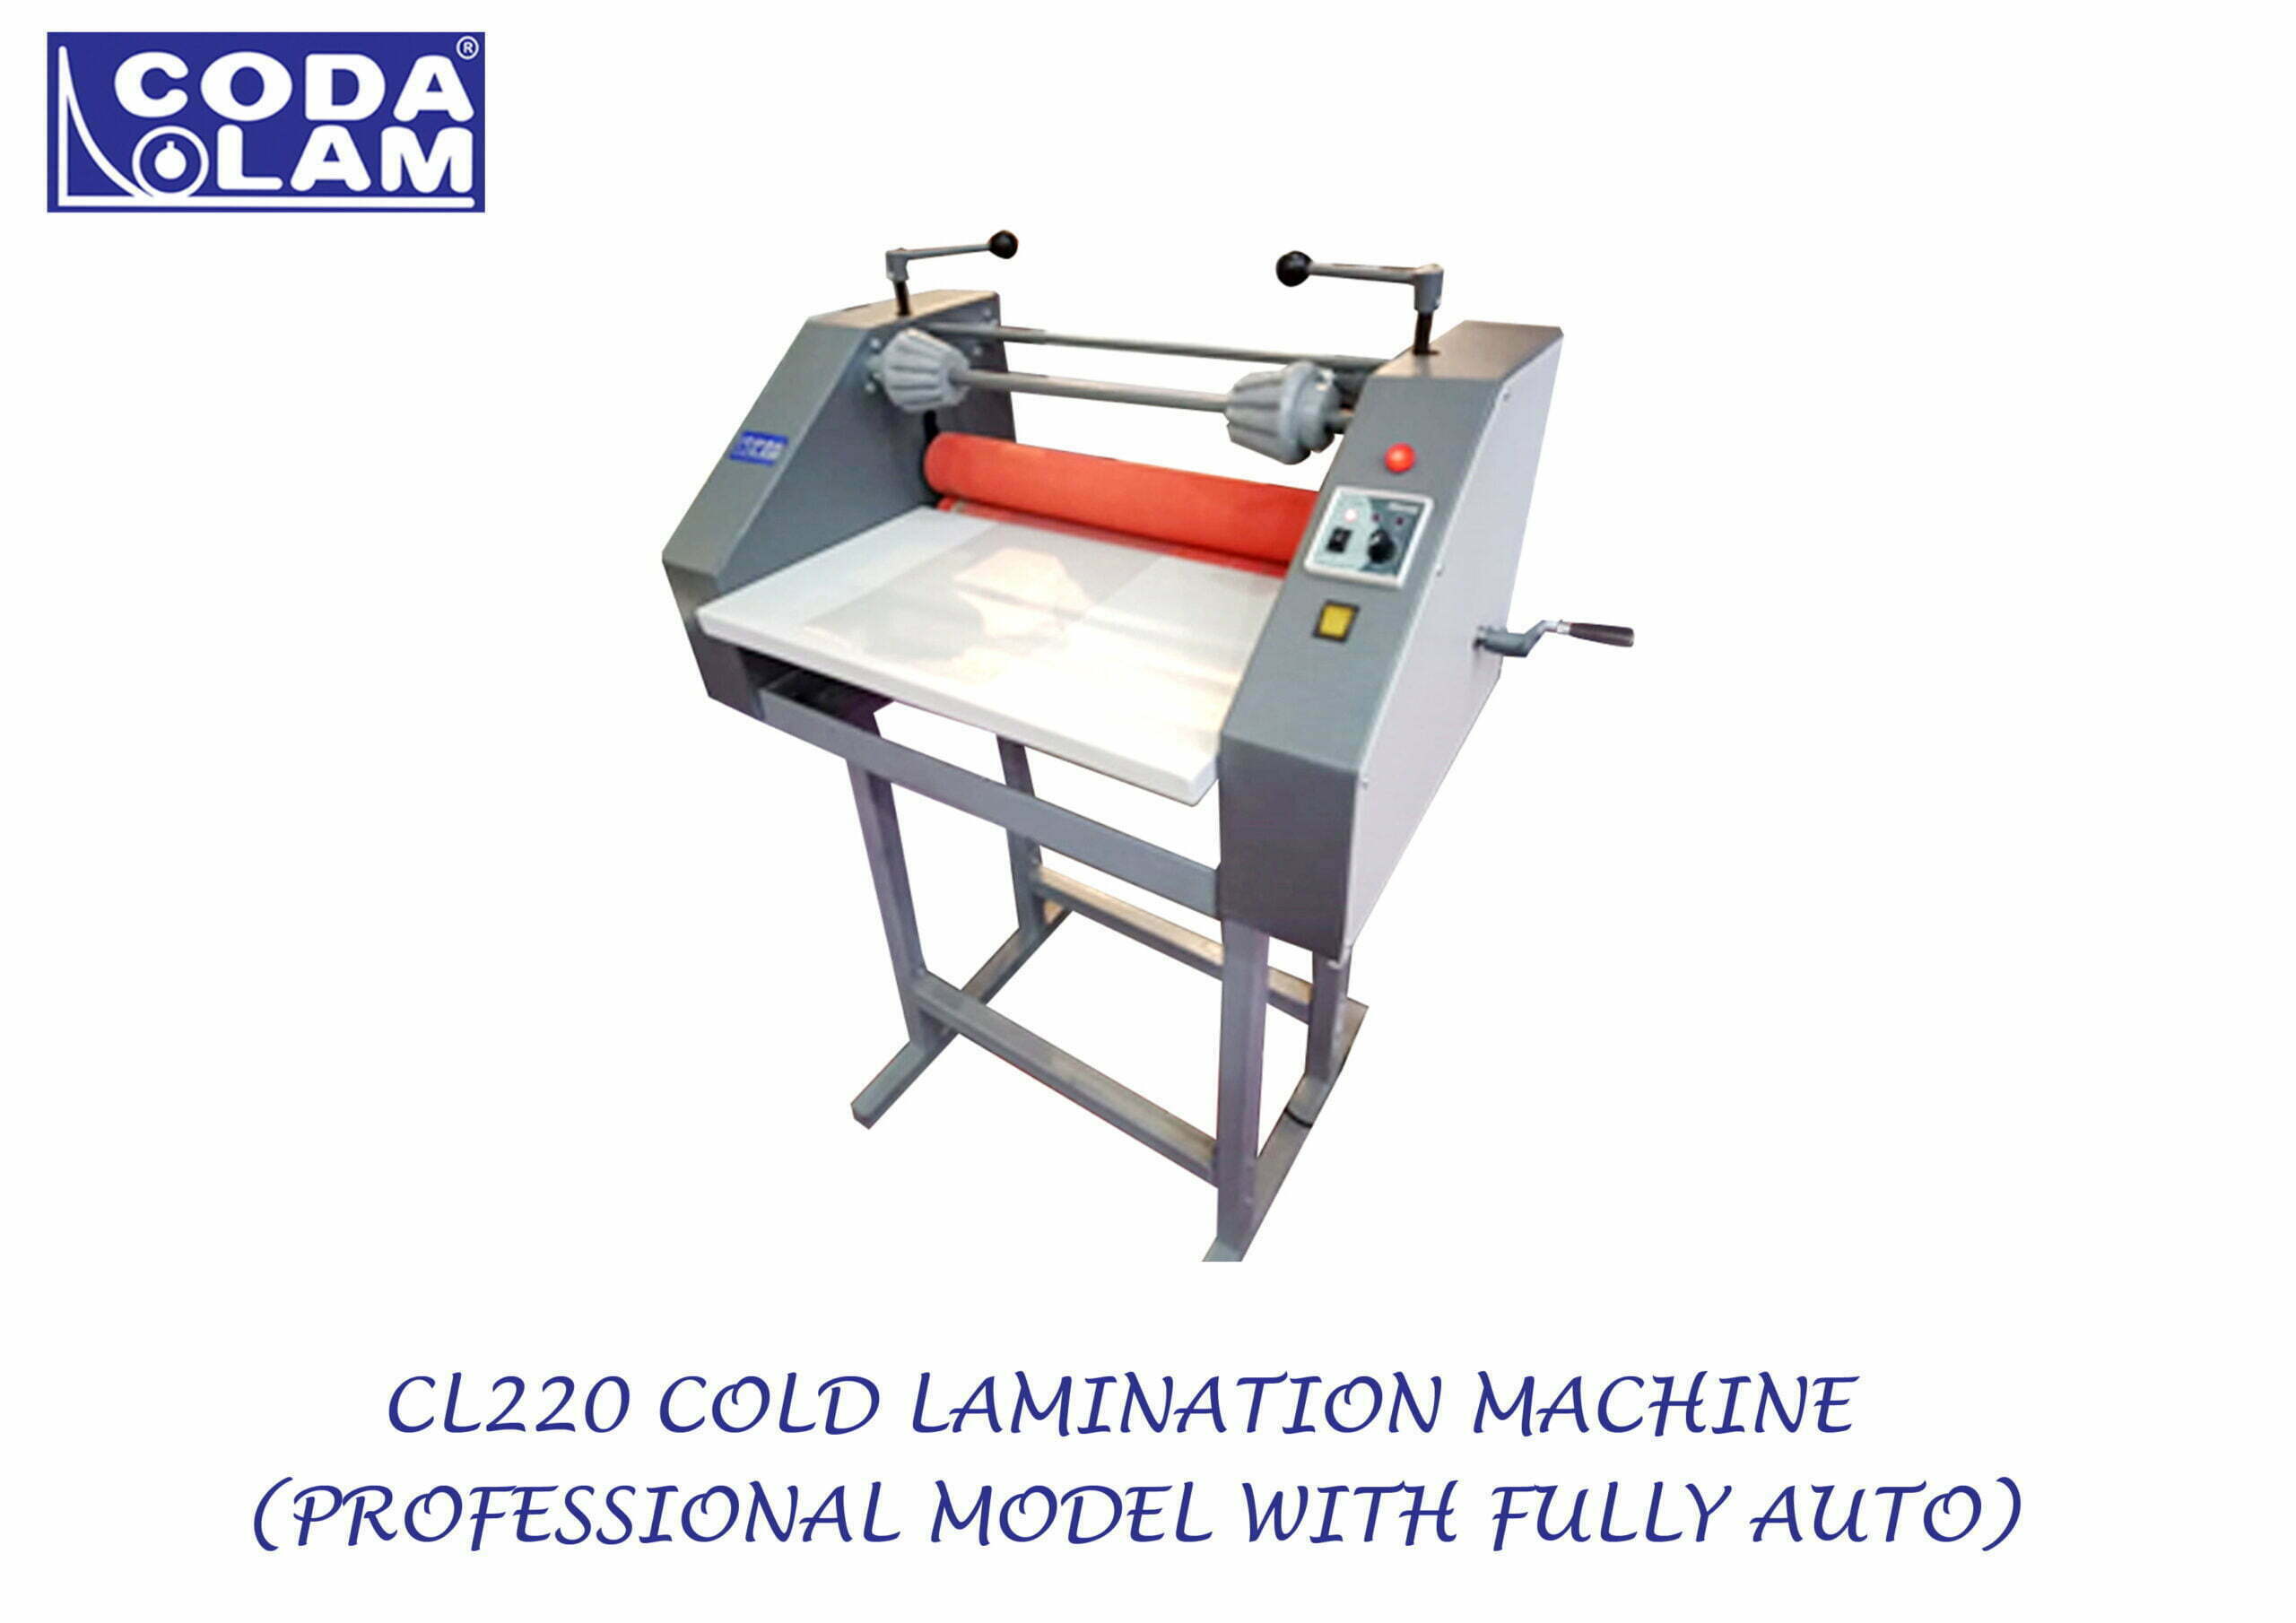 fully automatic cold lamination machine manufacturer in Delhi , India